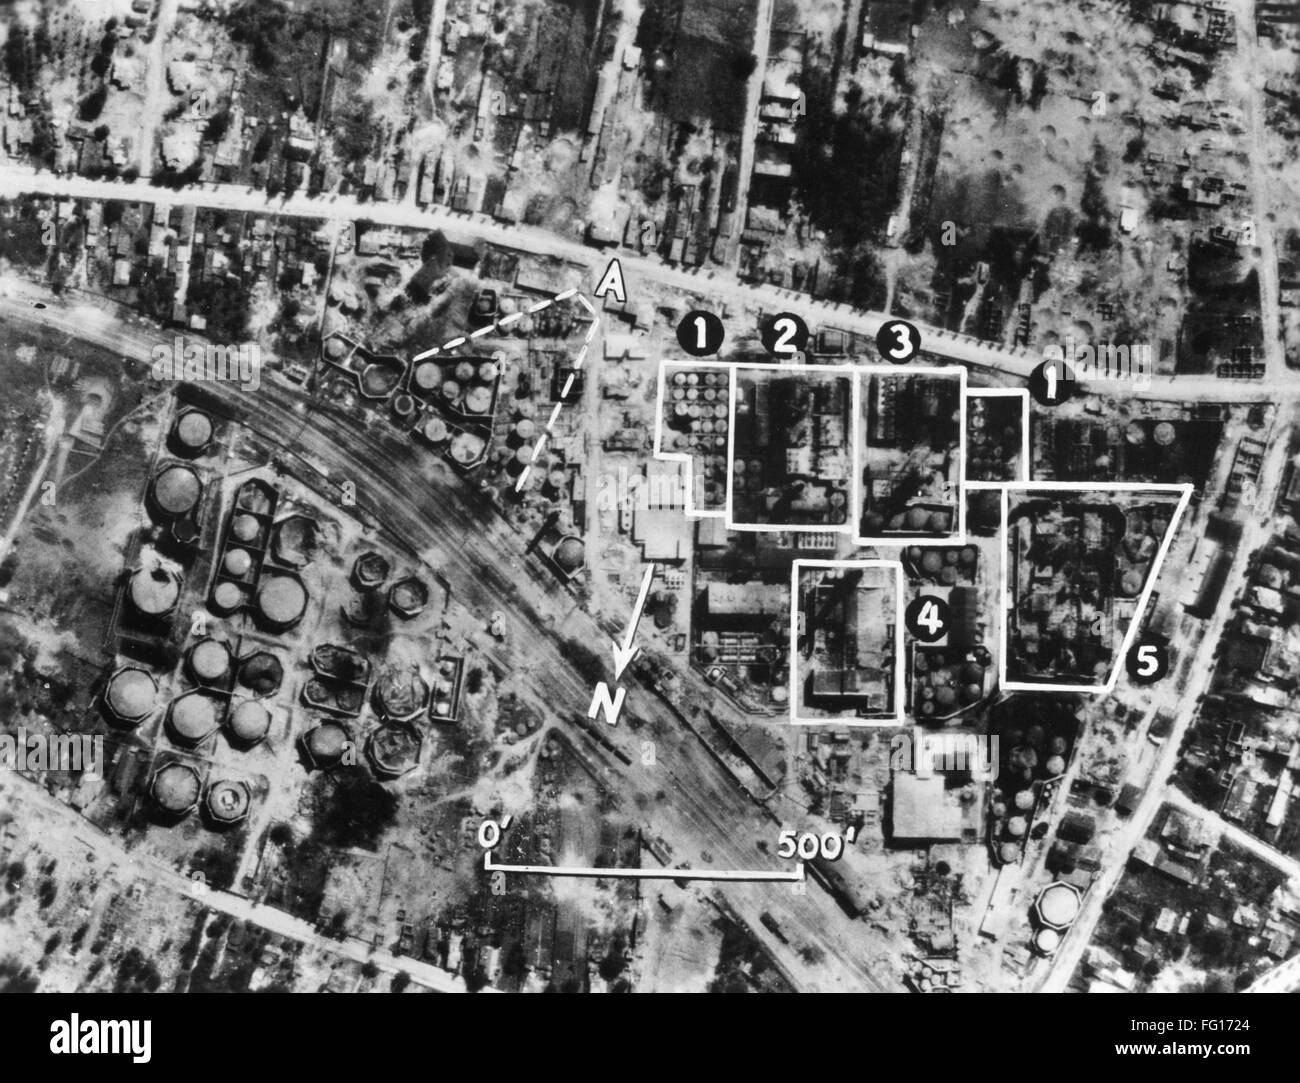 ROMANIA: OIL REFINERY. /nAnnotated aerial photograph of the Steaua Oil Refinery in Campina, Romania, a target of Allied air strikes, 1943. Stock Photo